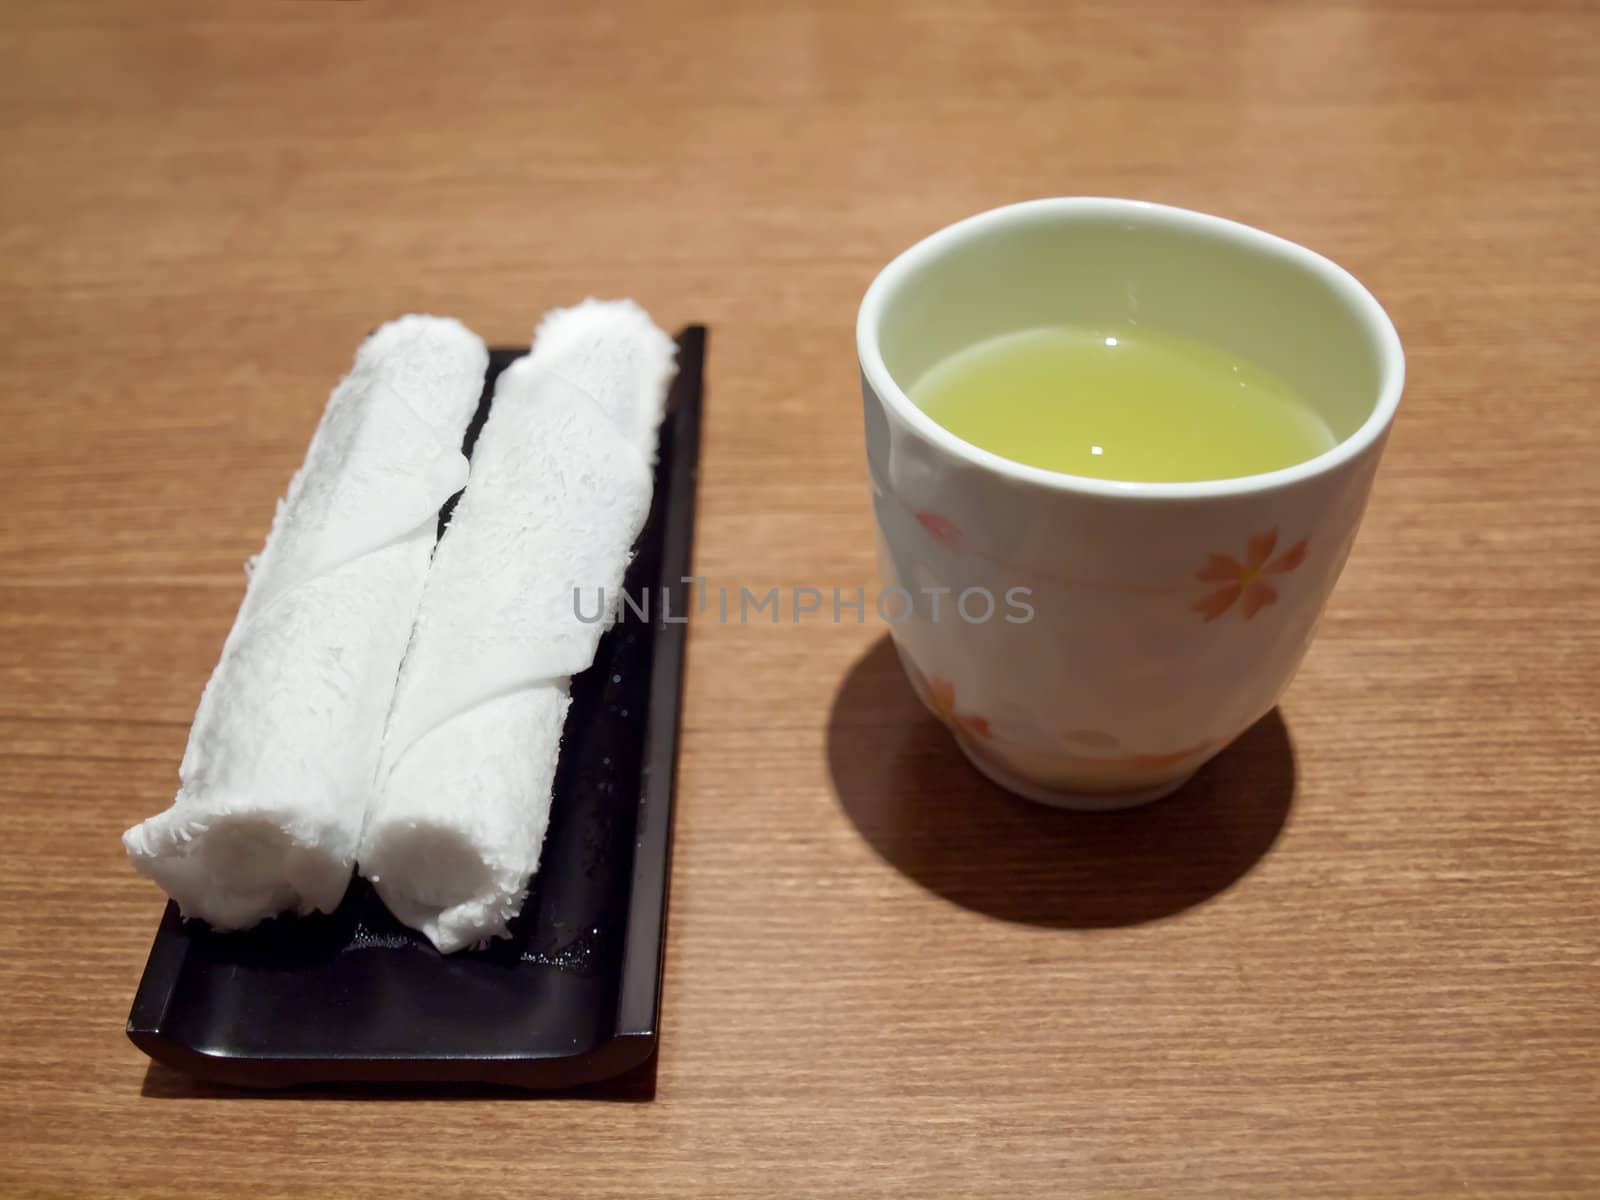 Teacup with roll of hand towel for cleaning your hand before meal time